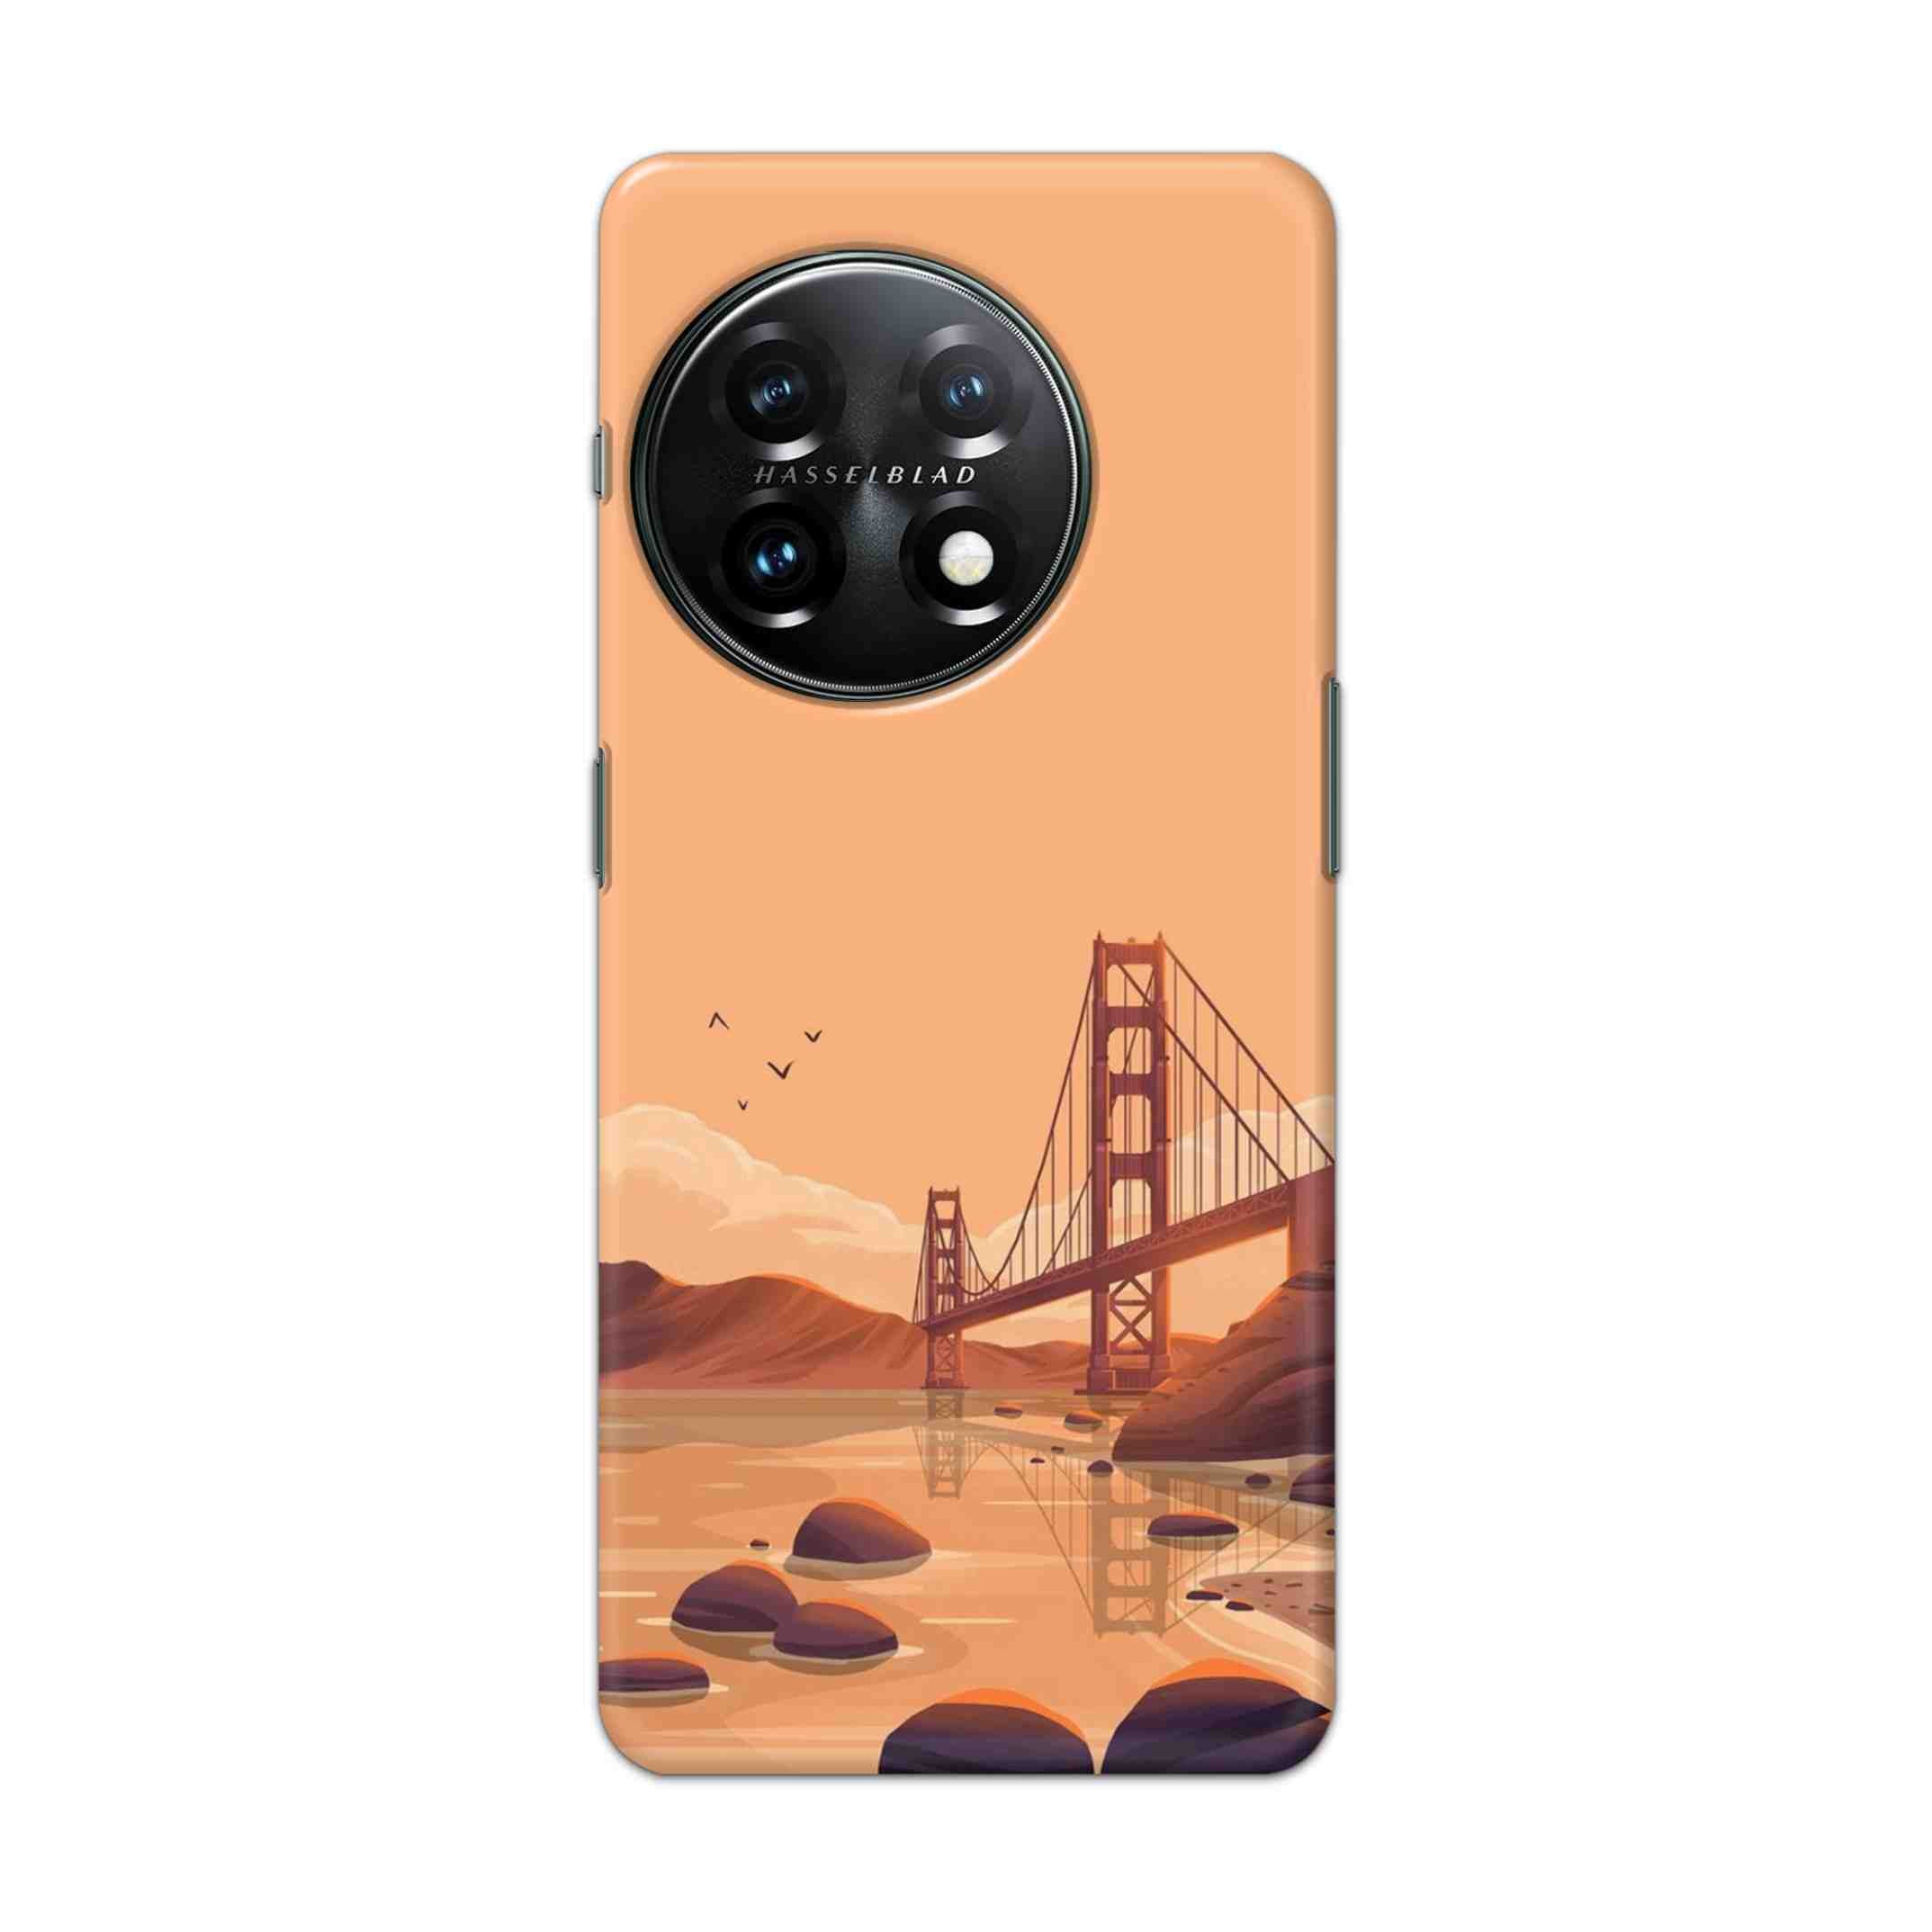 Buy San Francisco Hard Back Mobile Phone Case Cover For Oneplus 11 5G Online